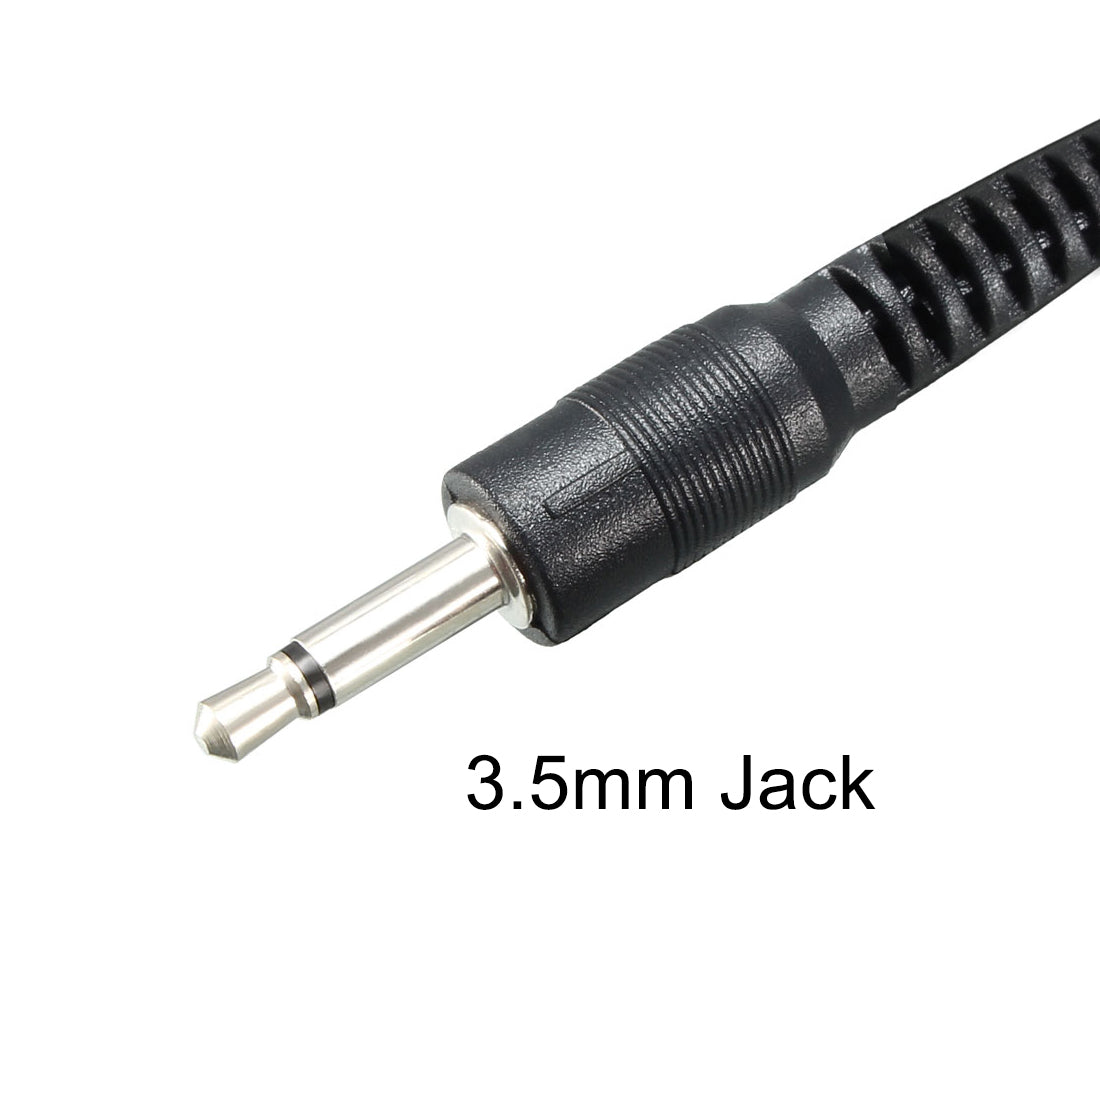 uxcell Uxcell 3.5mm Jack IR Emitter Extension 3 Meters Cable 45 Degree Emission Angle